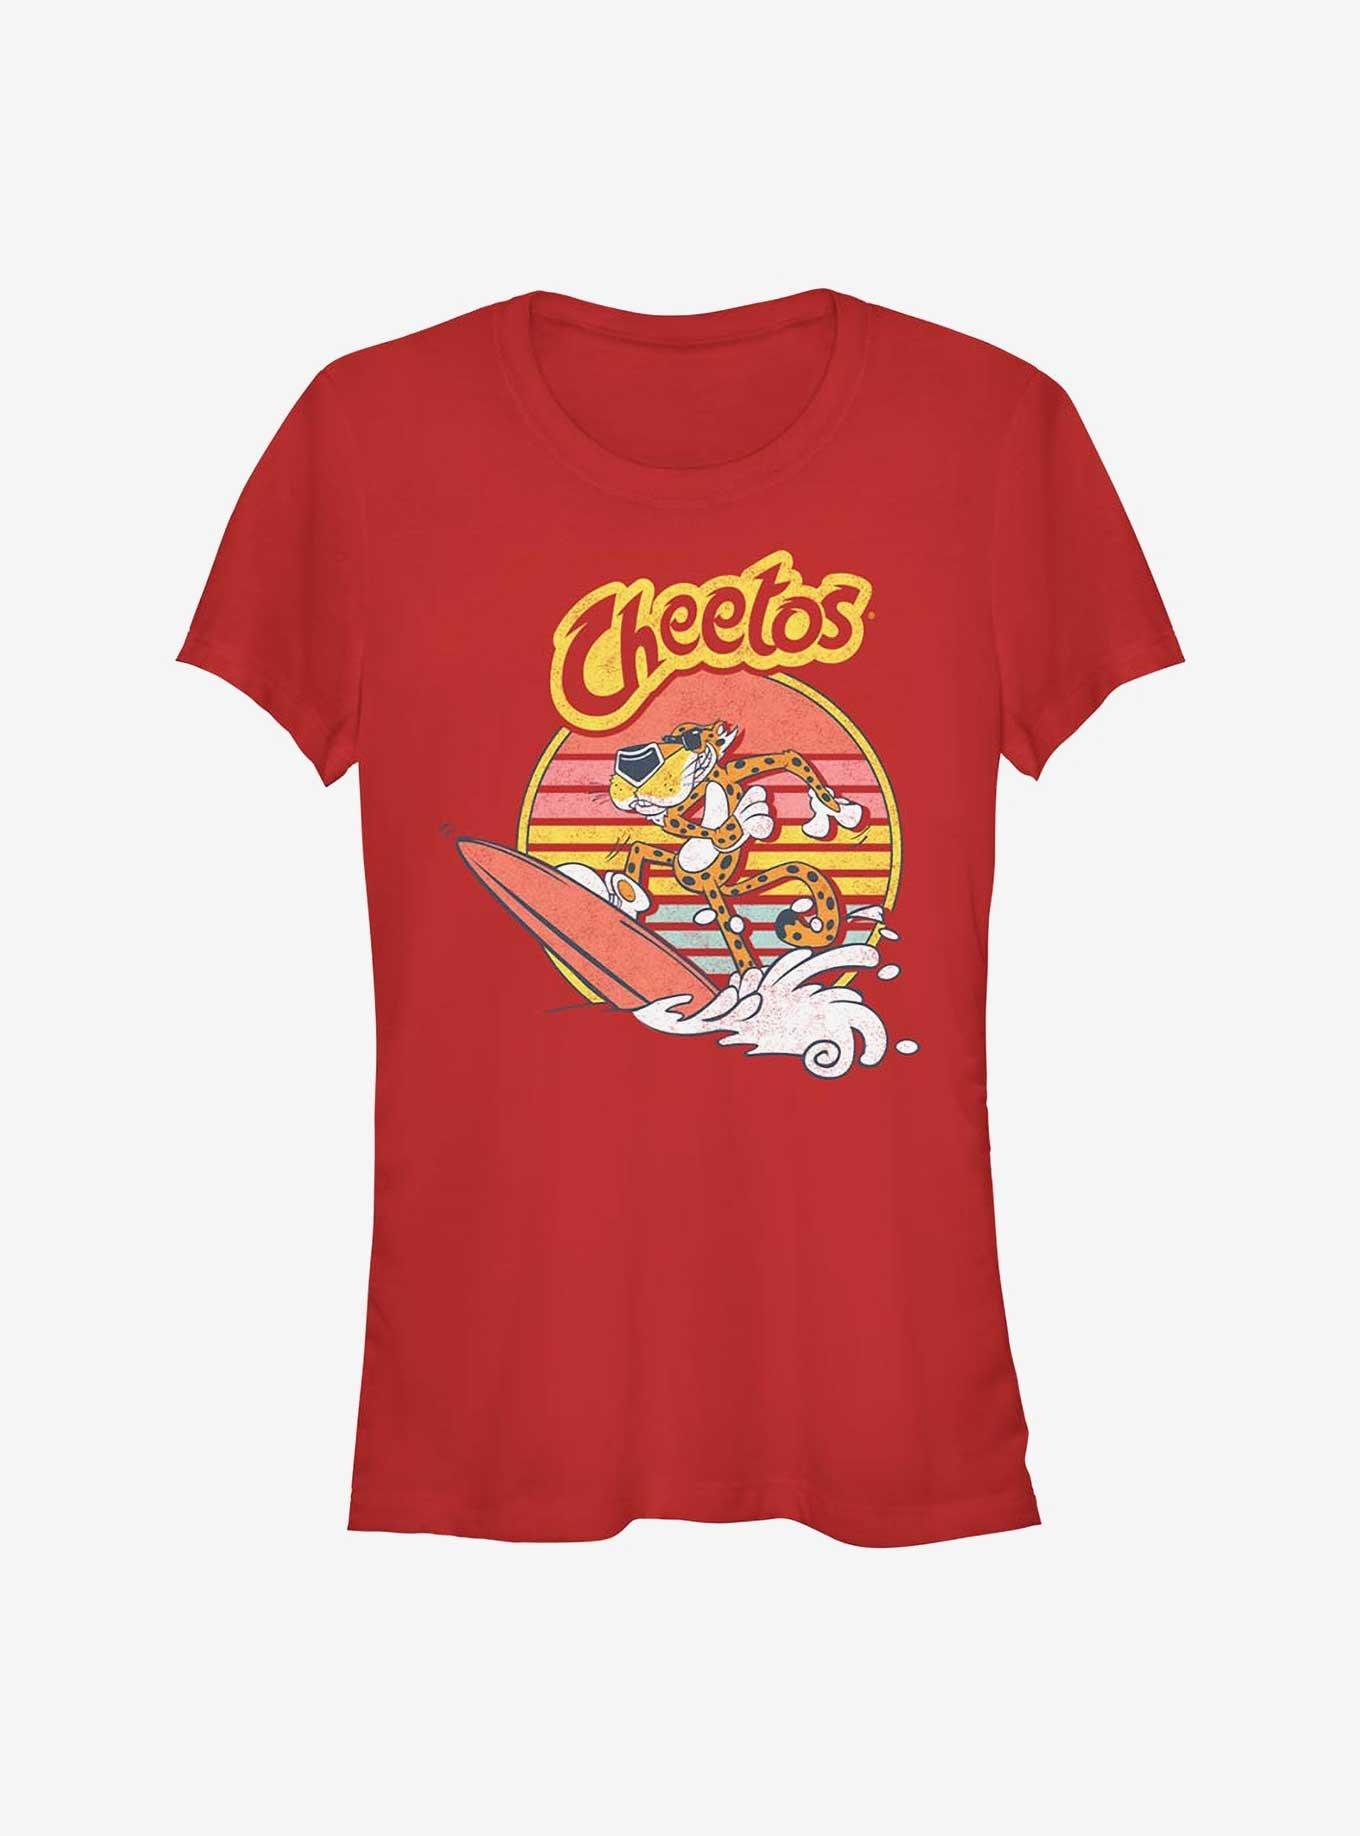 Cheetos Surfing Chester Catching Waves Girls T-Shirt, RED, hi-res